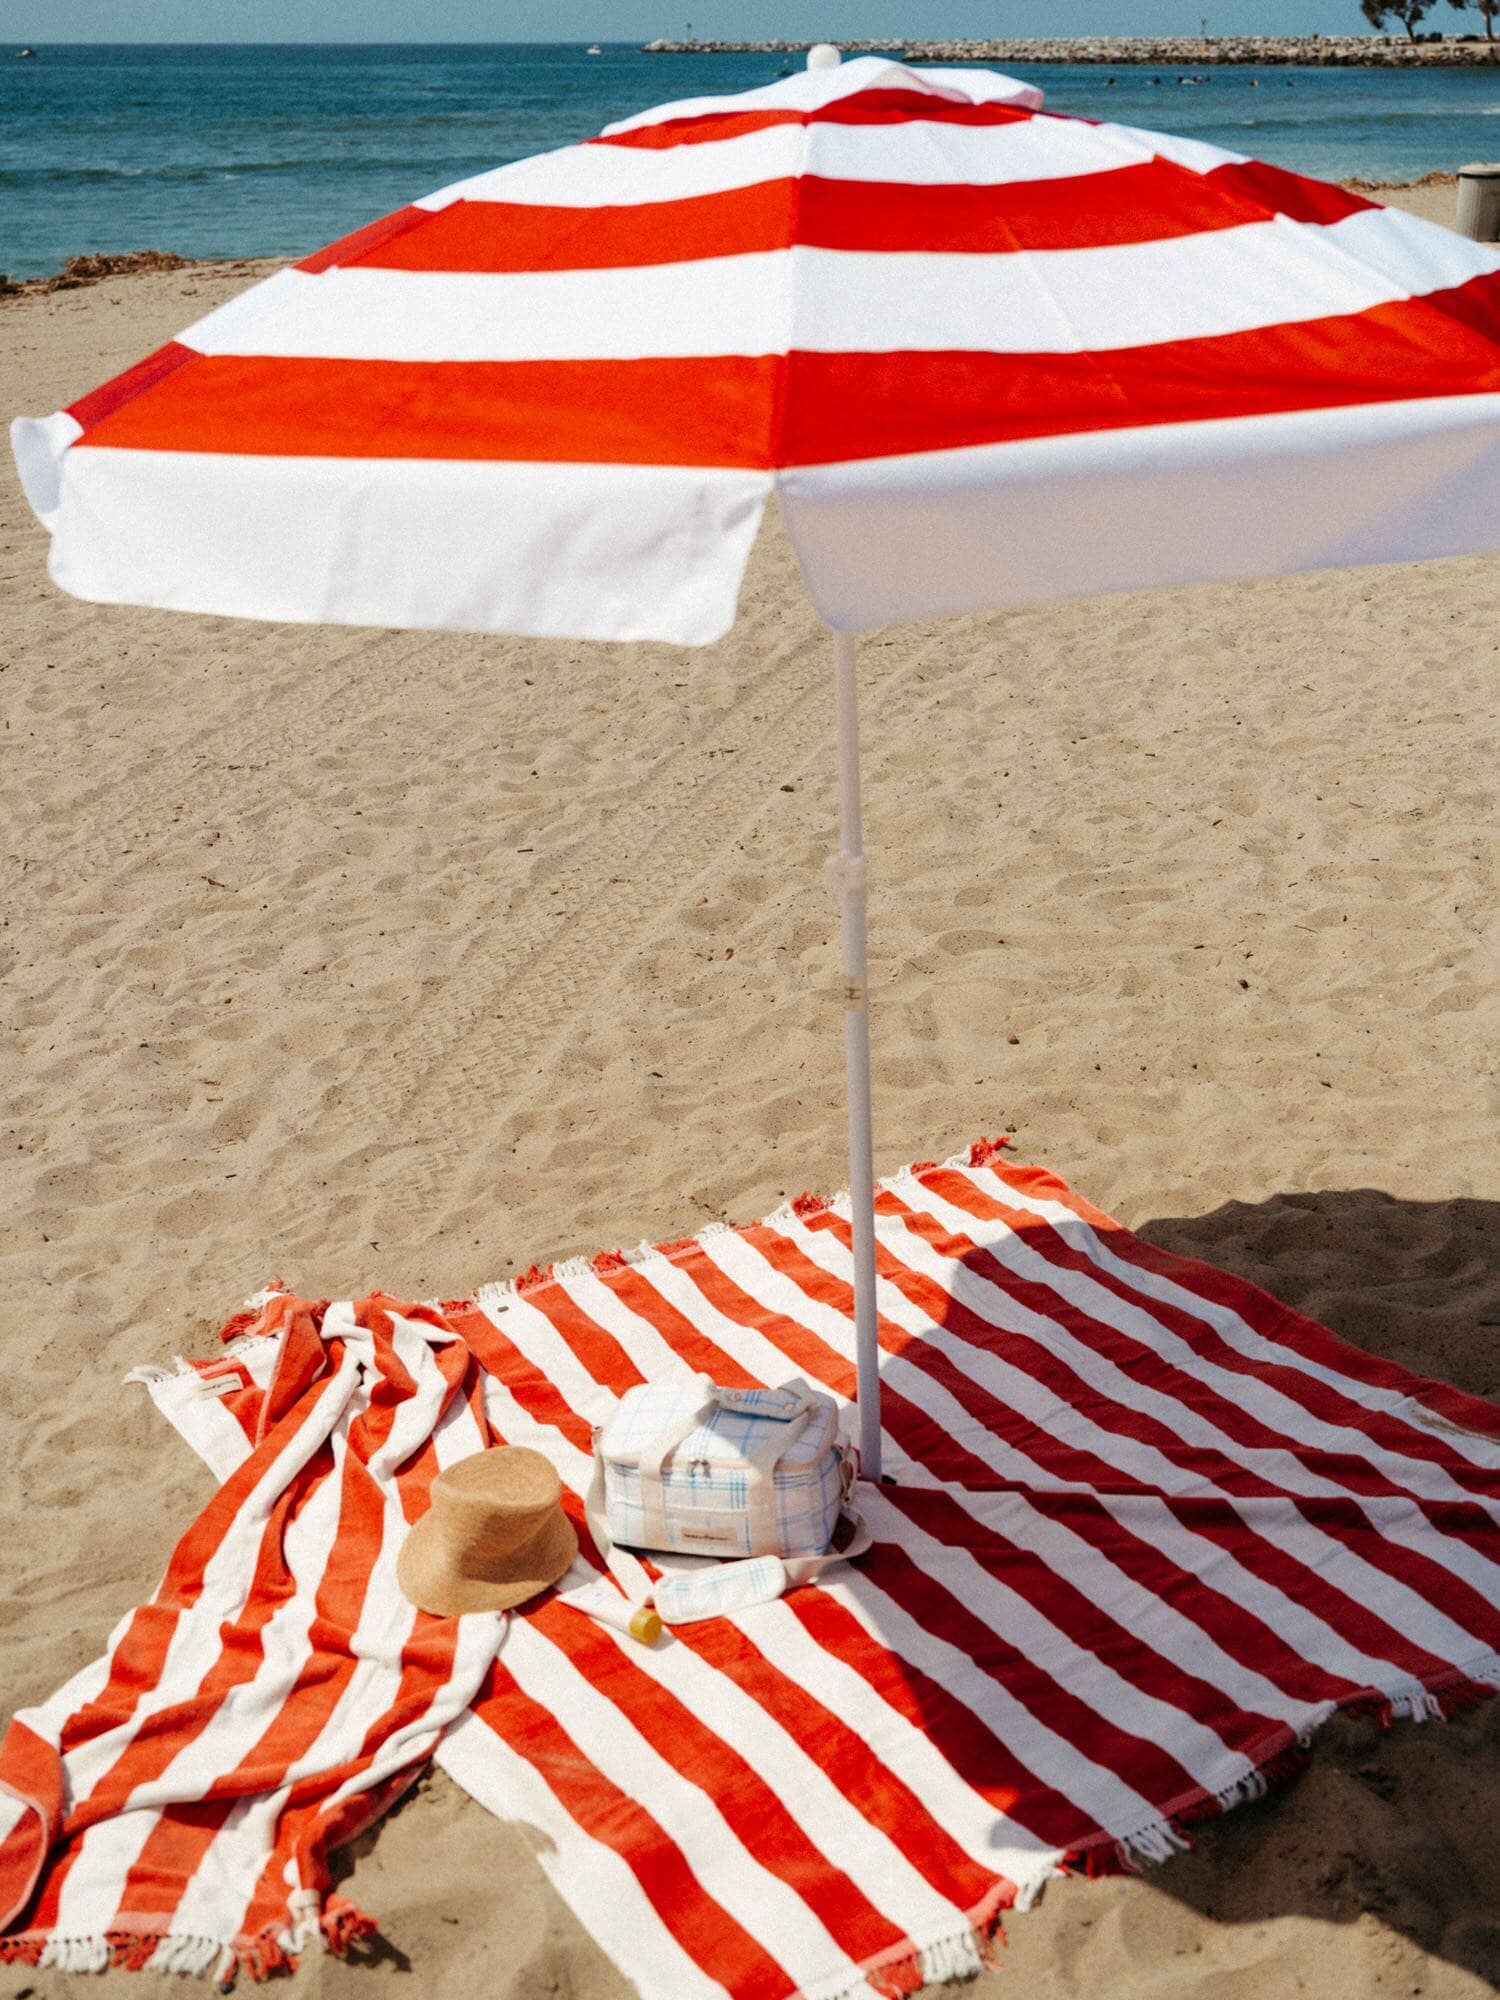 Blue plaid cooler on the beach with le sirenuse umbrella, towel and blanket